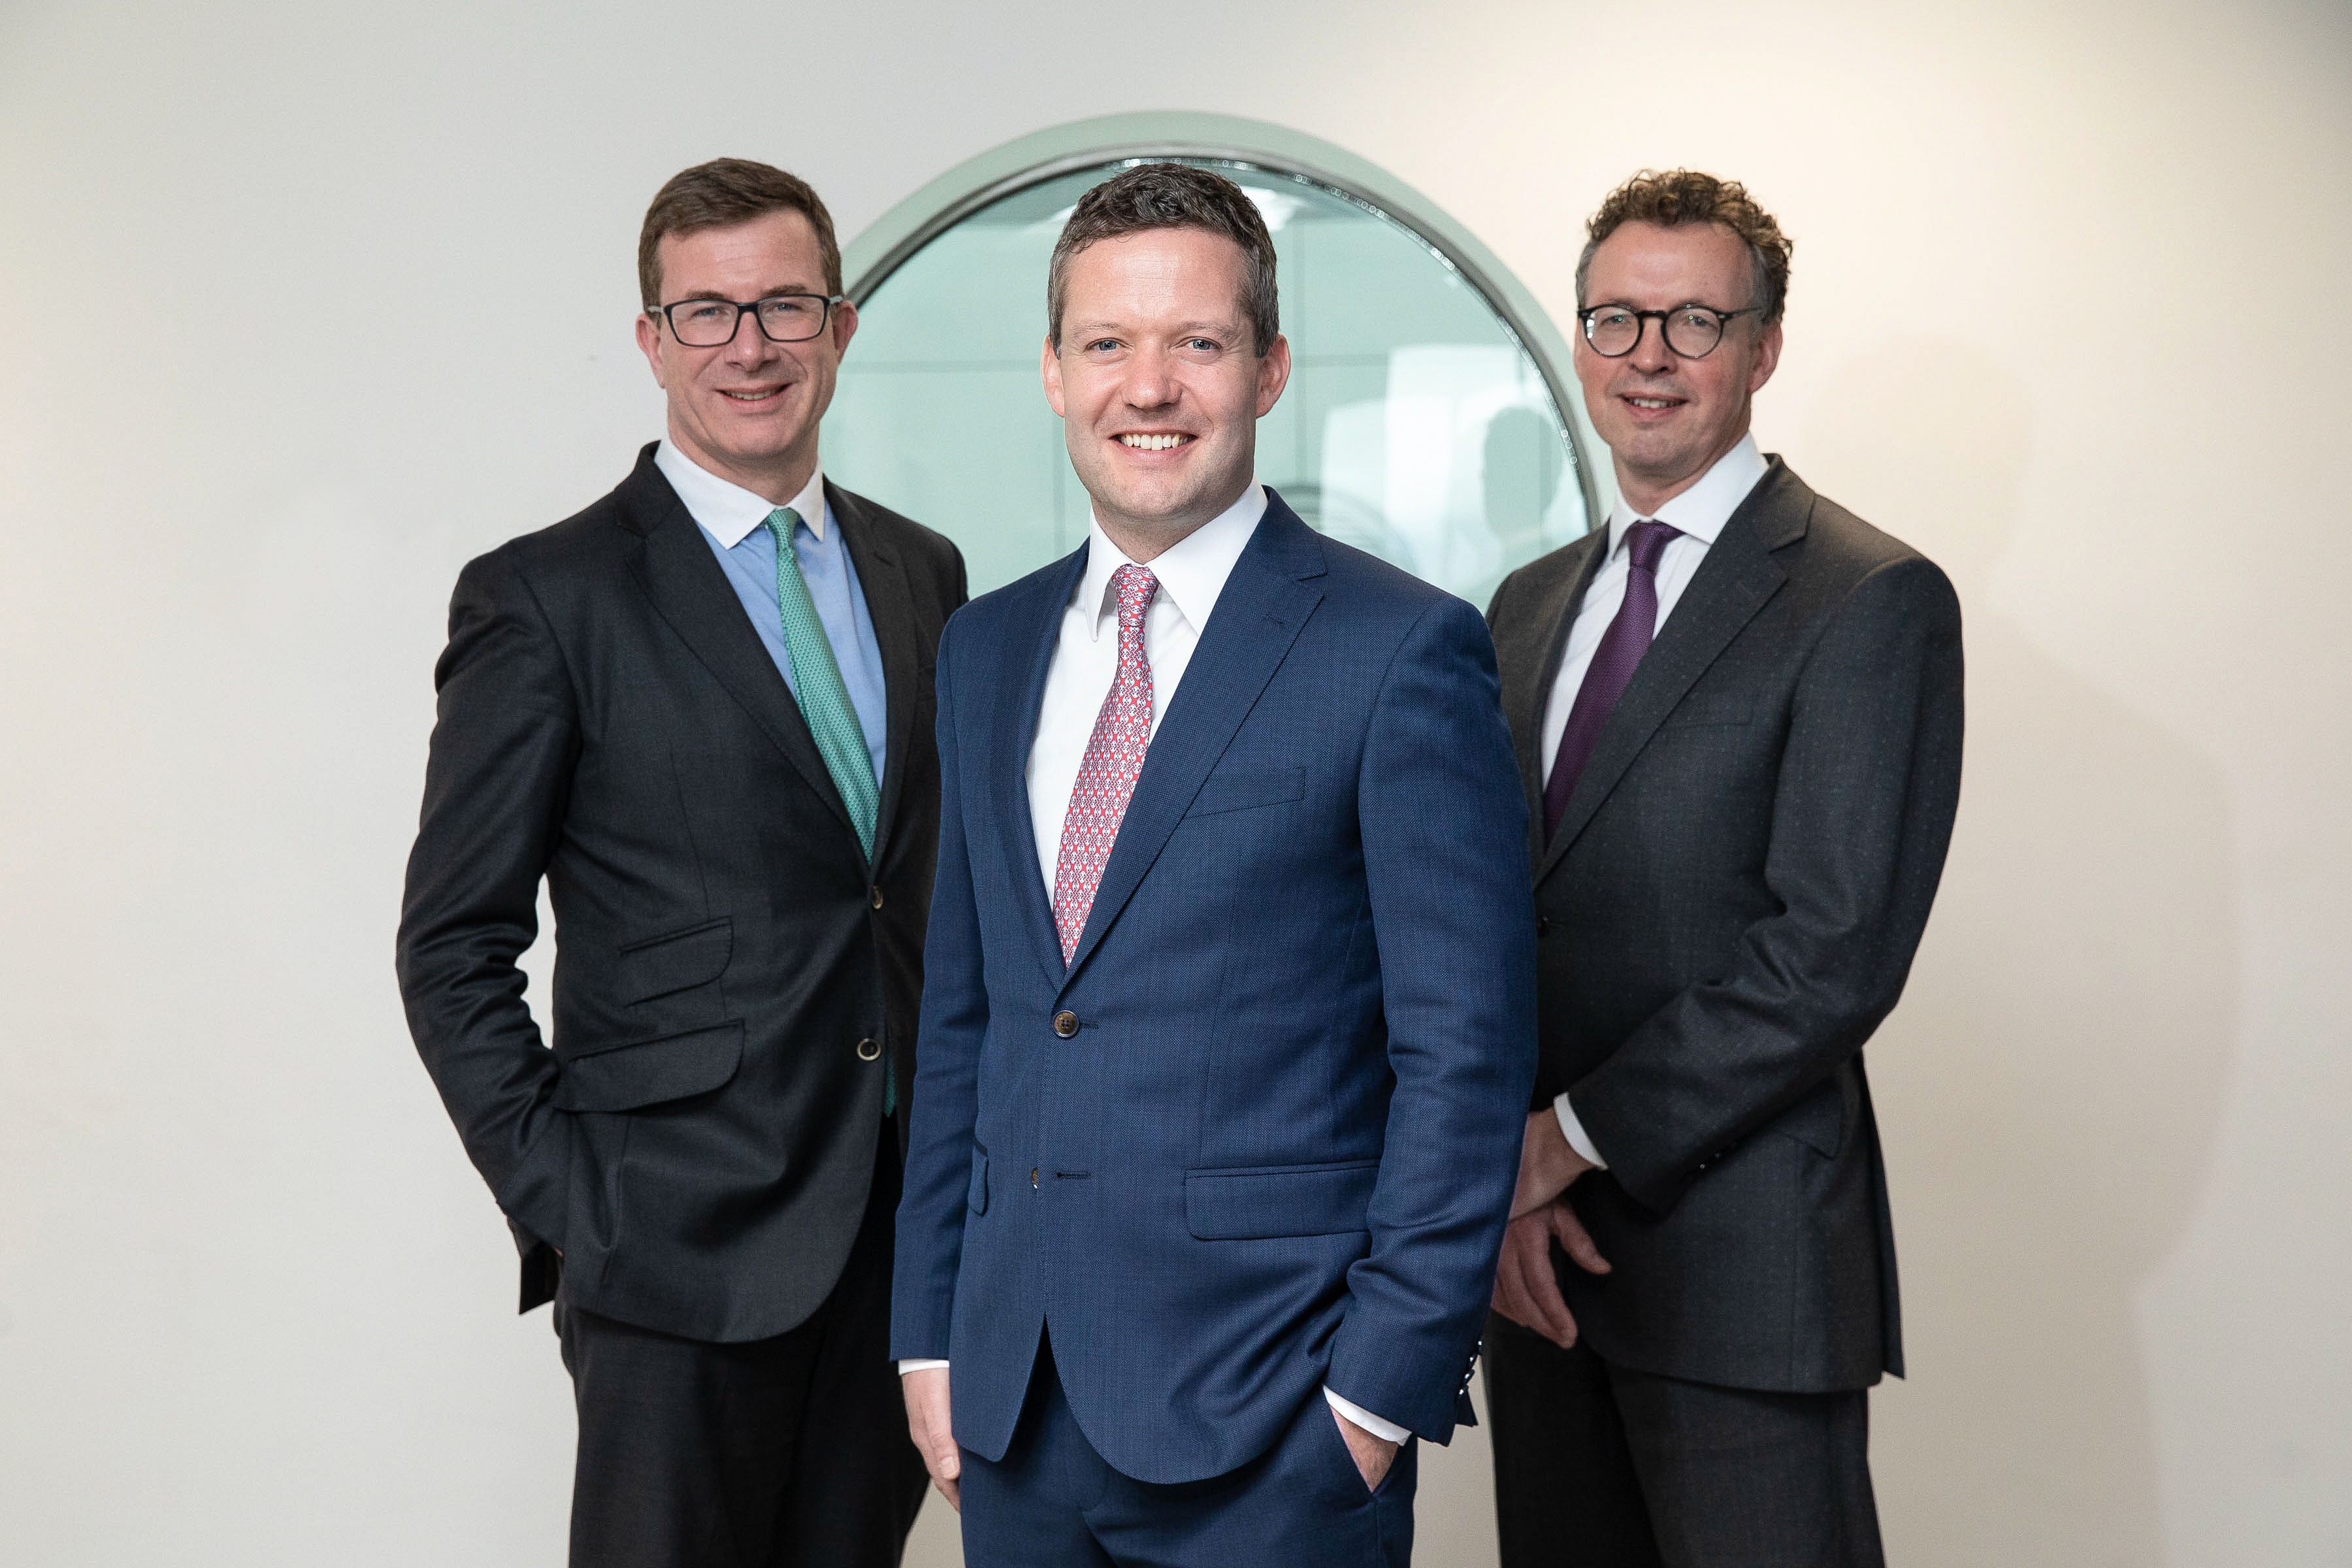 A&L Goodbody appoints Kerill O'Shaughnessy as asset management and investment funds partner